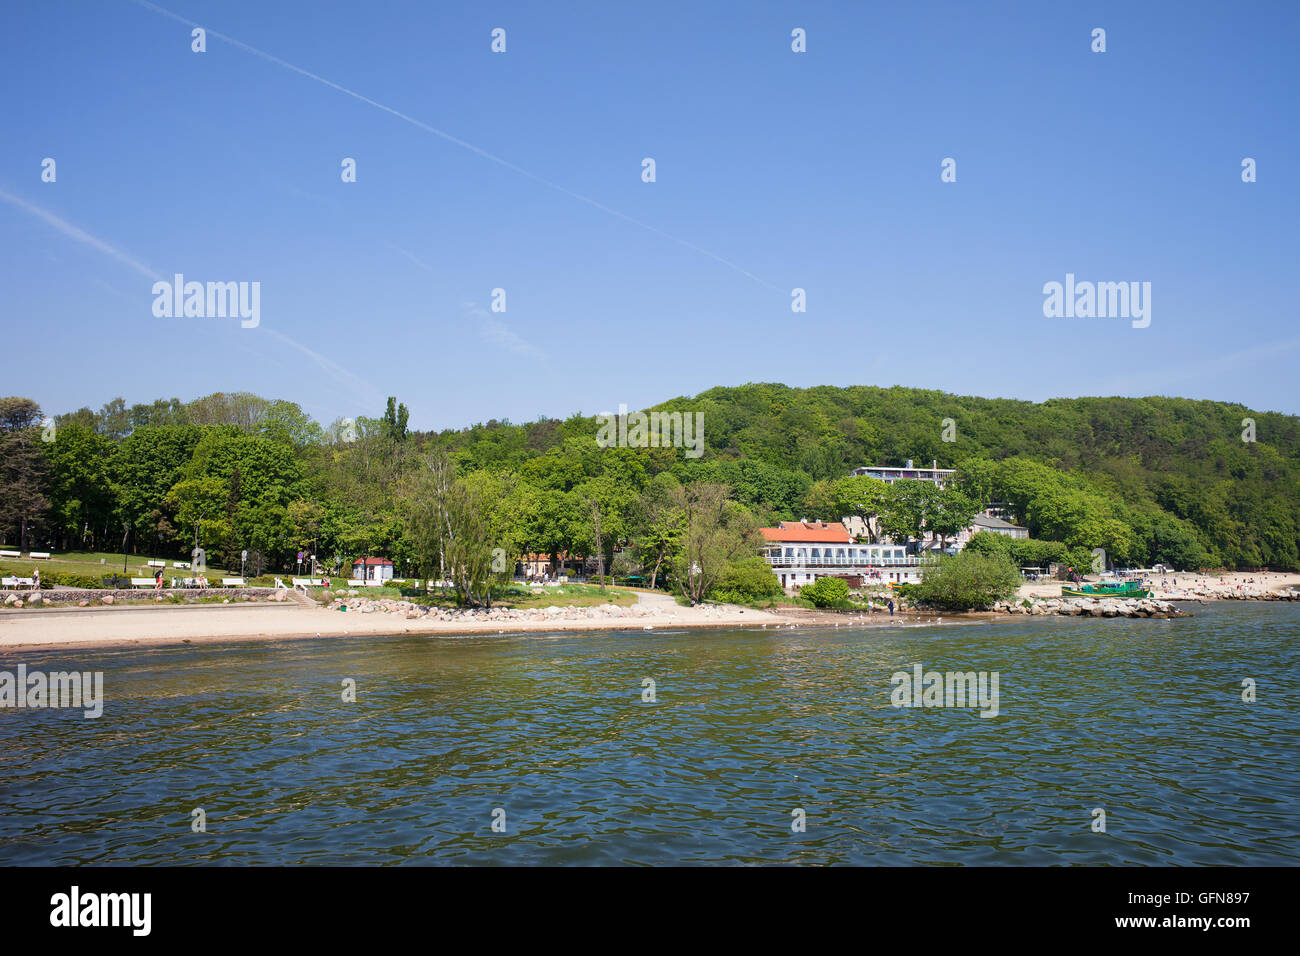 City of Gdynia, Orlowo and Redlowo districts, beach and coastline at Baltic Sea in Poland, Europe Stock Photo